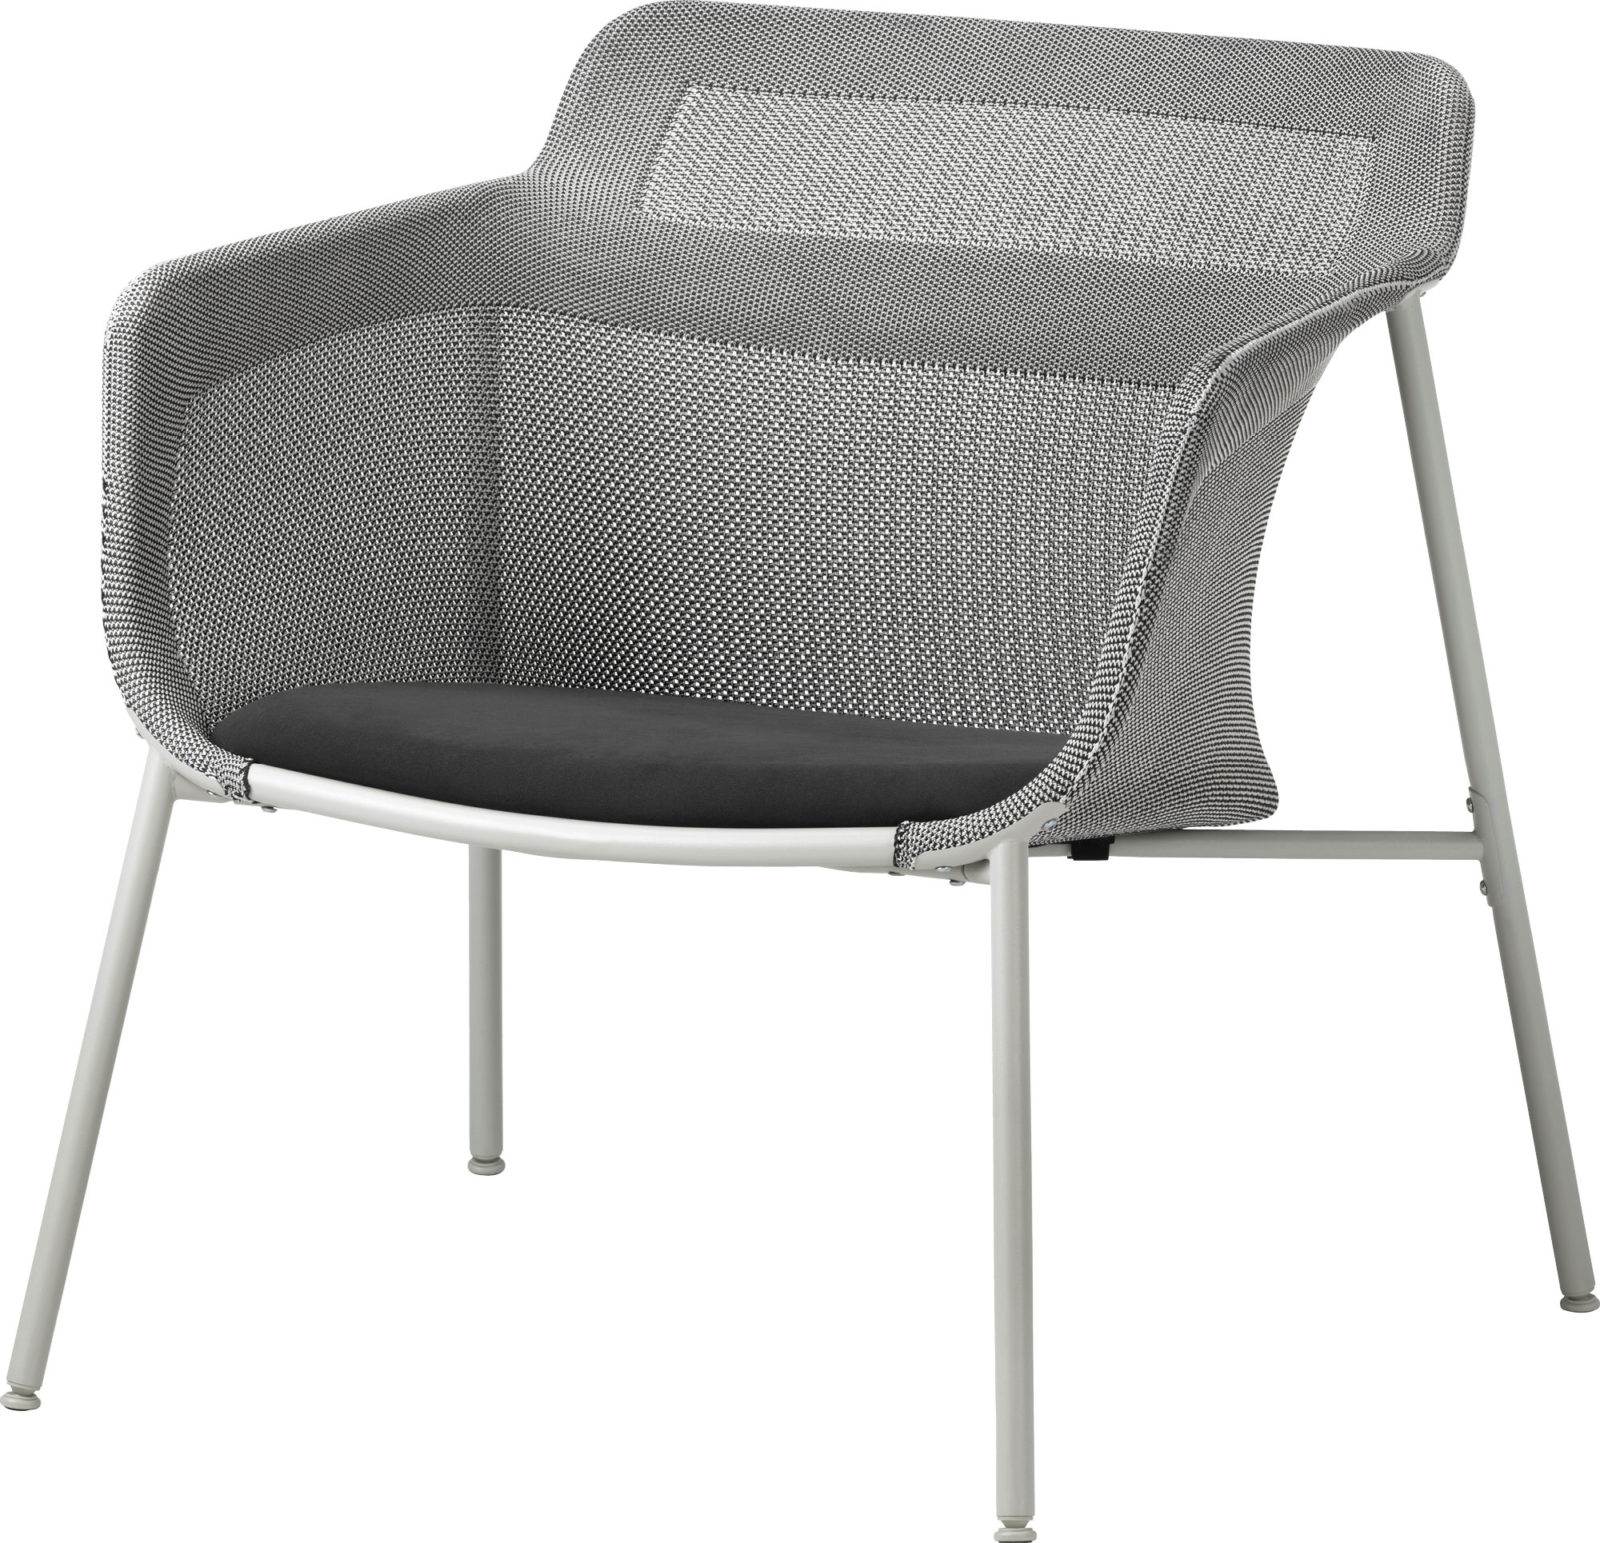 Grey armchair manufactured using 3D knitting, giving it a light, almost transparent surface.